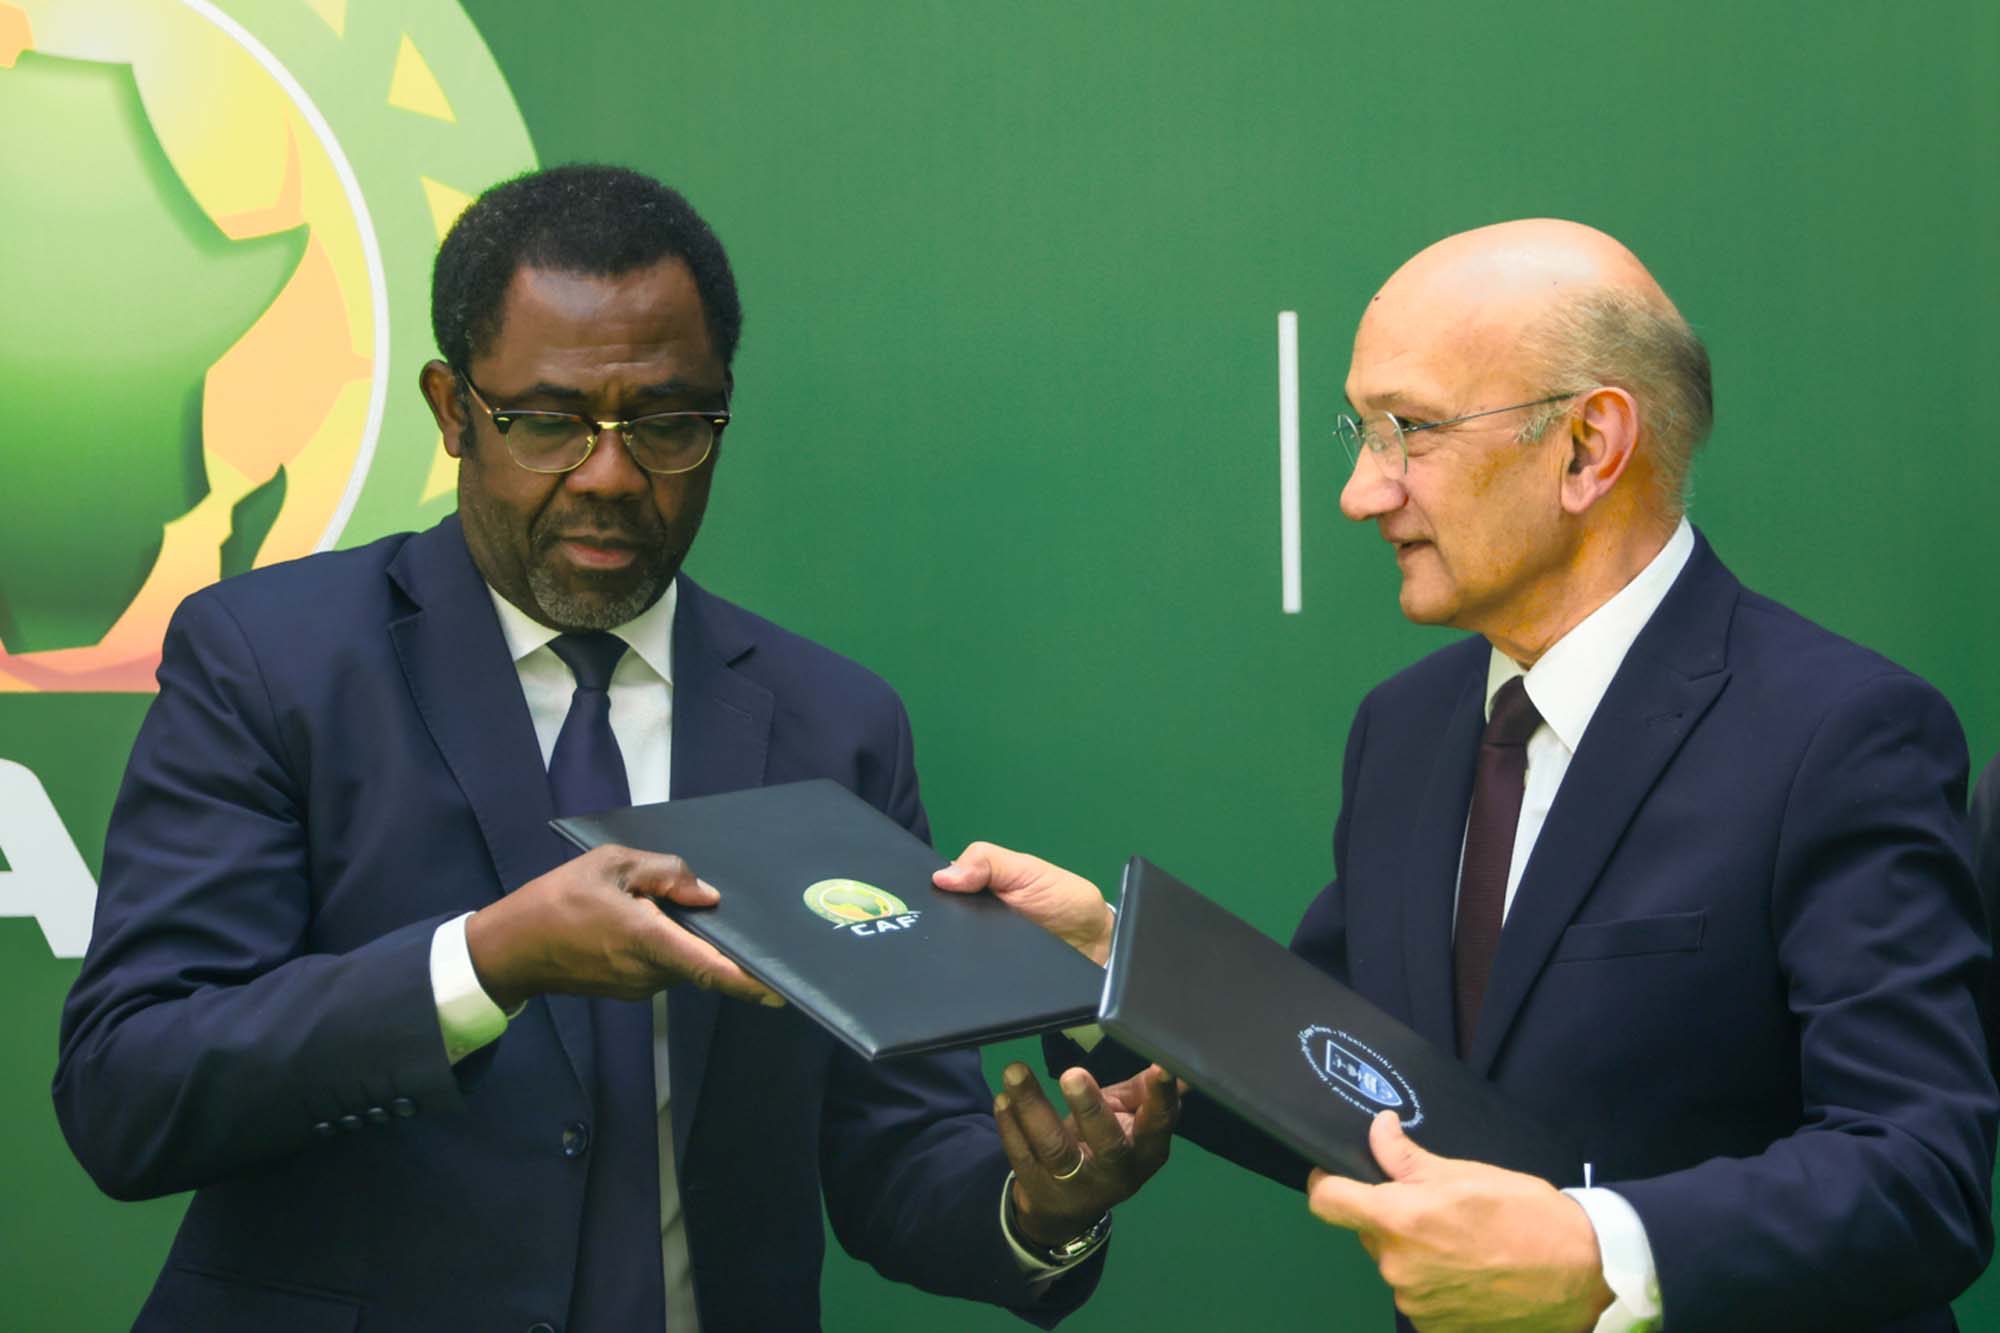 CAF Secretary General, Mr Veron Mosengo-Omba, and University of Cape Town (UCT) Vice-Chancellor interim, Professor Daya Reddy, exchange signed MoU files.